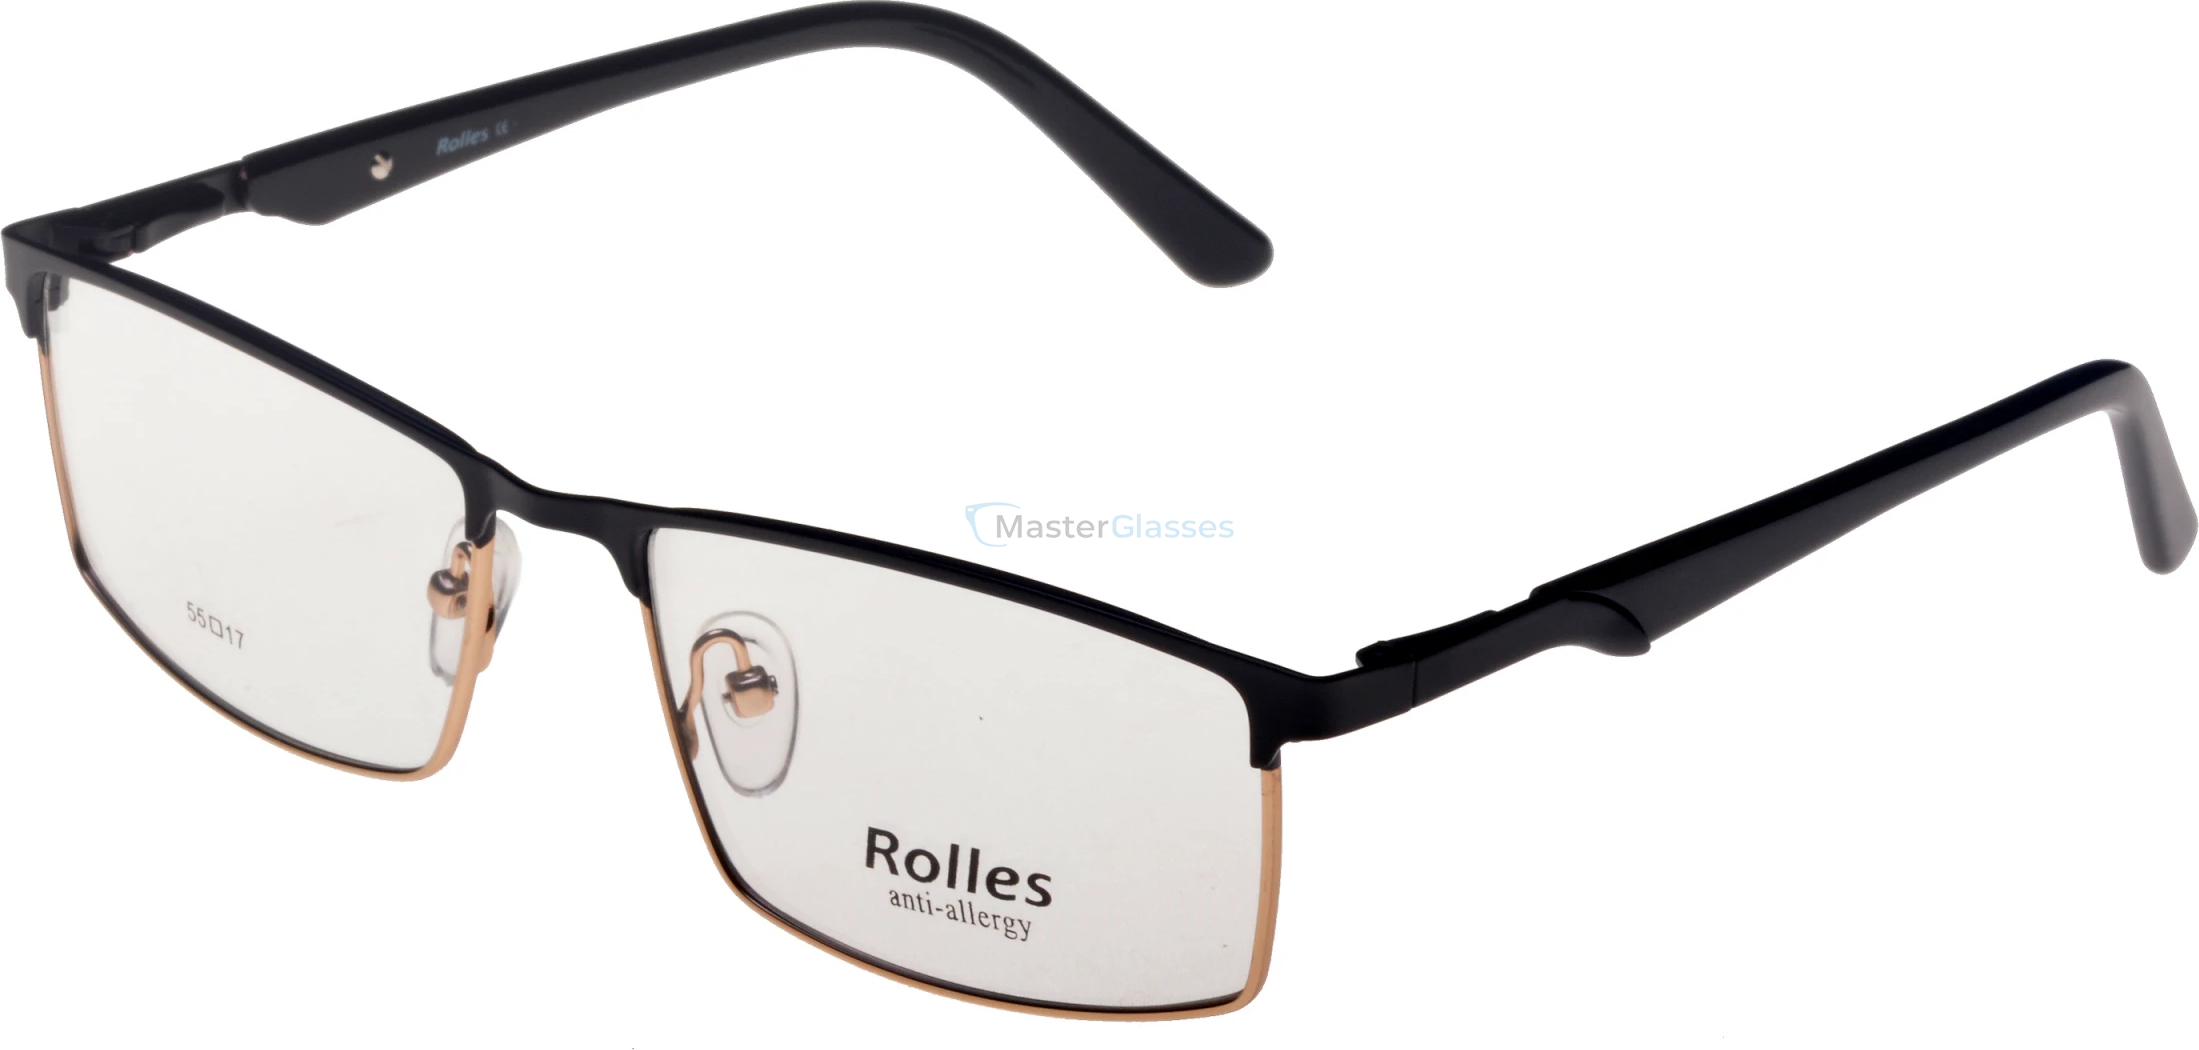  Rolles 653 01